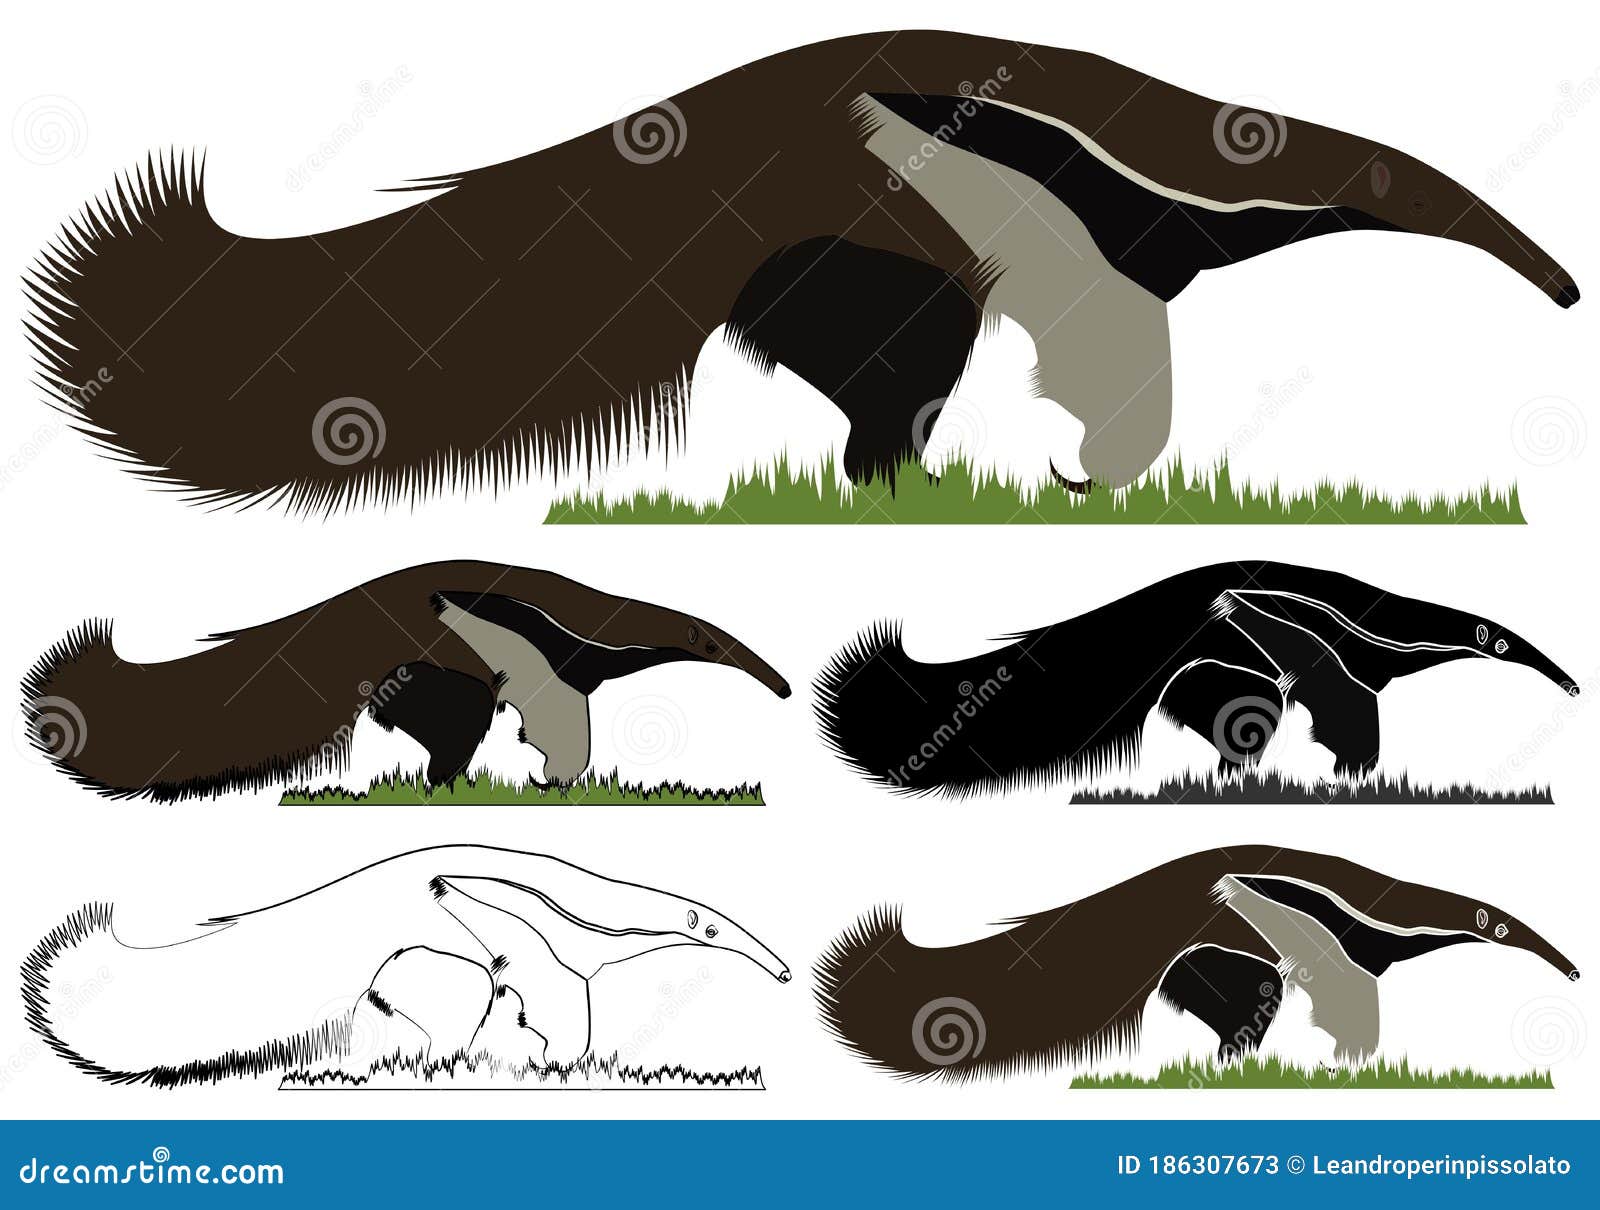 giant anteater bandeira in front view